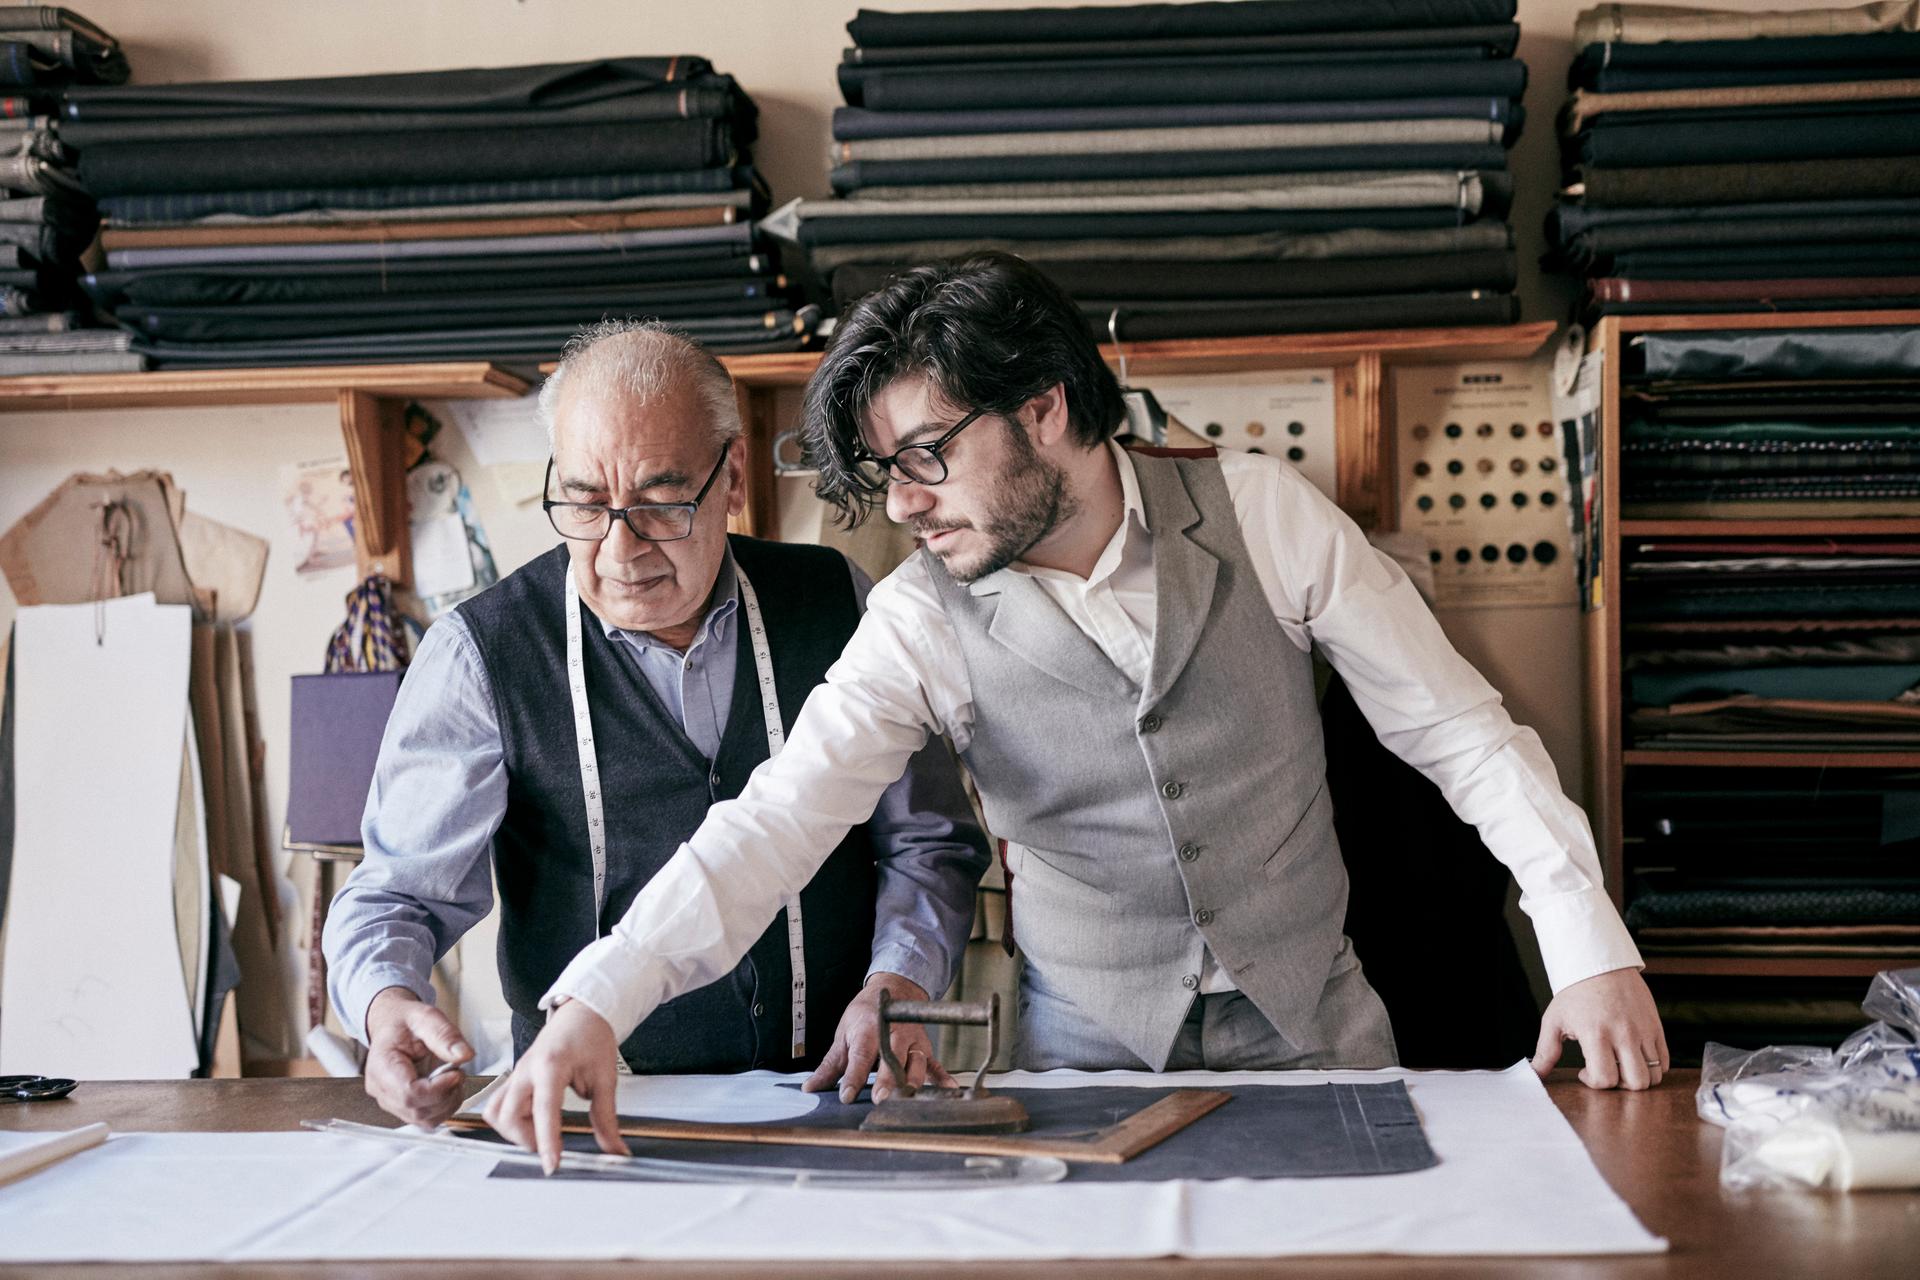 A young man works with an old man in a workshop with fabric, symbolizing Vontobel's life insurance service.